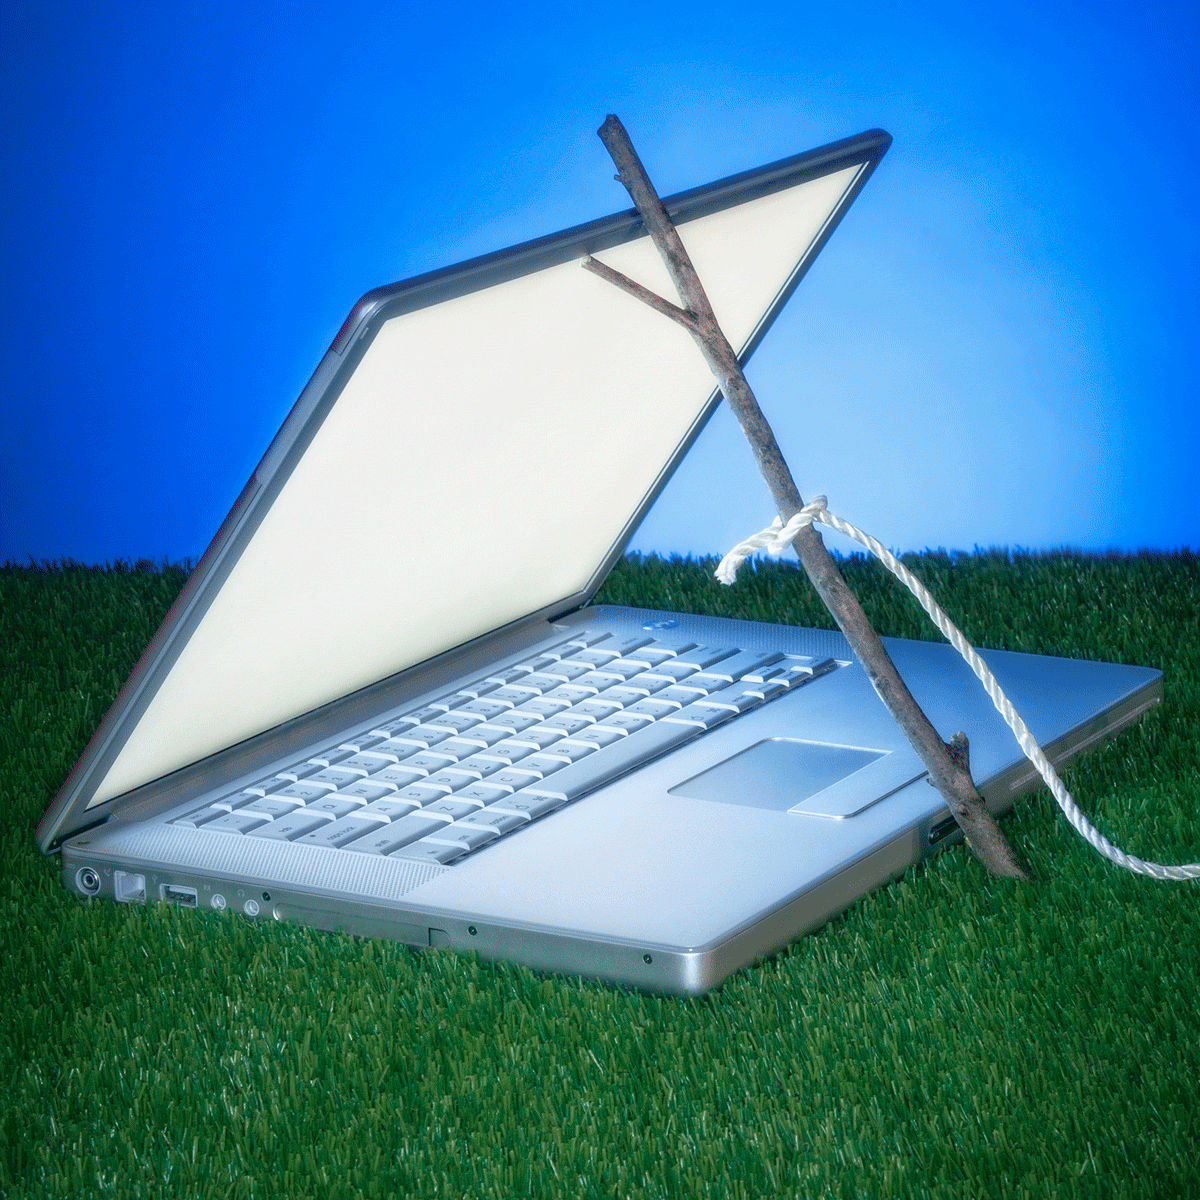 a laptop in the grass held open with a stick trap. alert icons appearing.